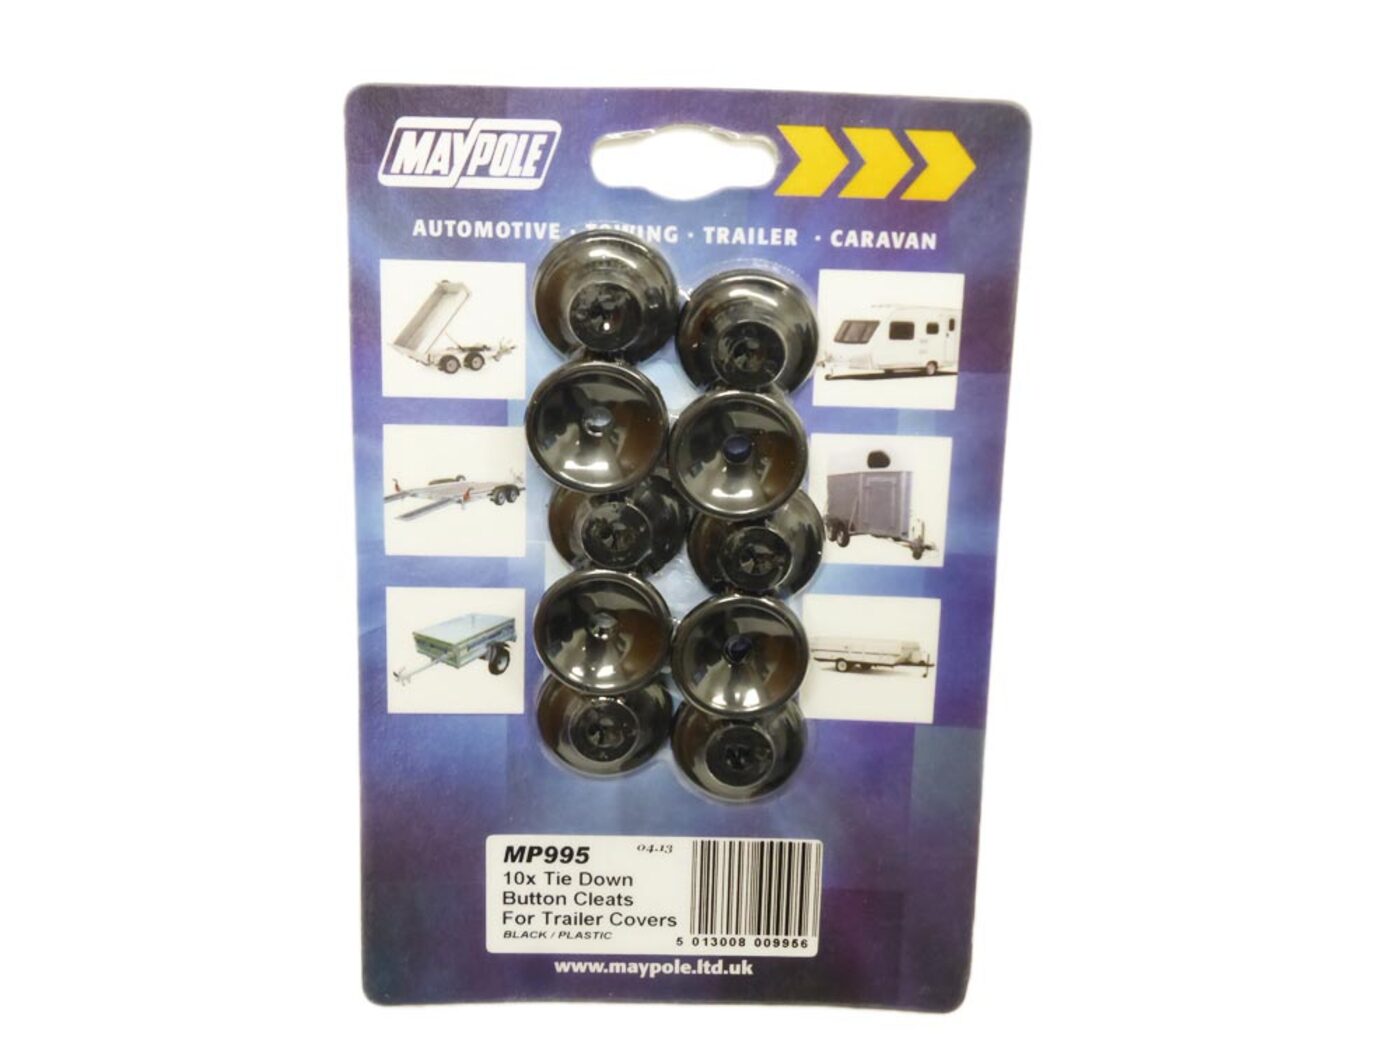 Maypole Trailer Cover Tie Down Button Cleats Pack of 10